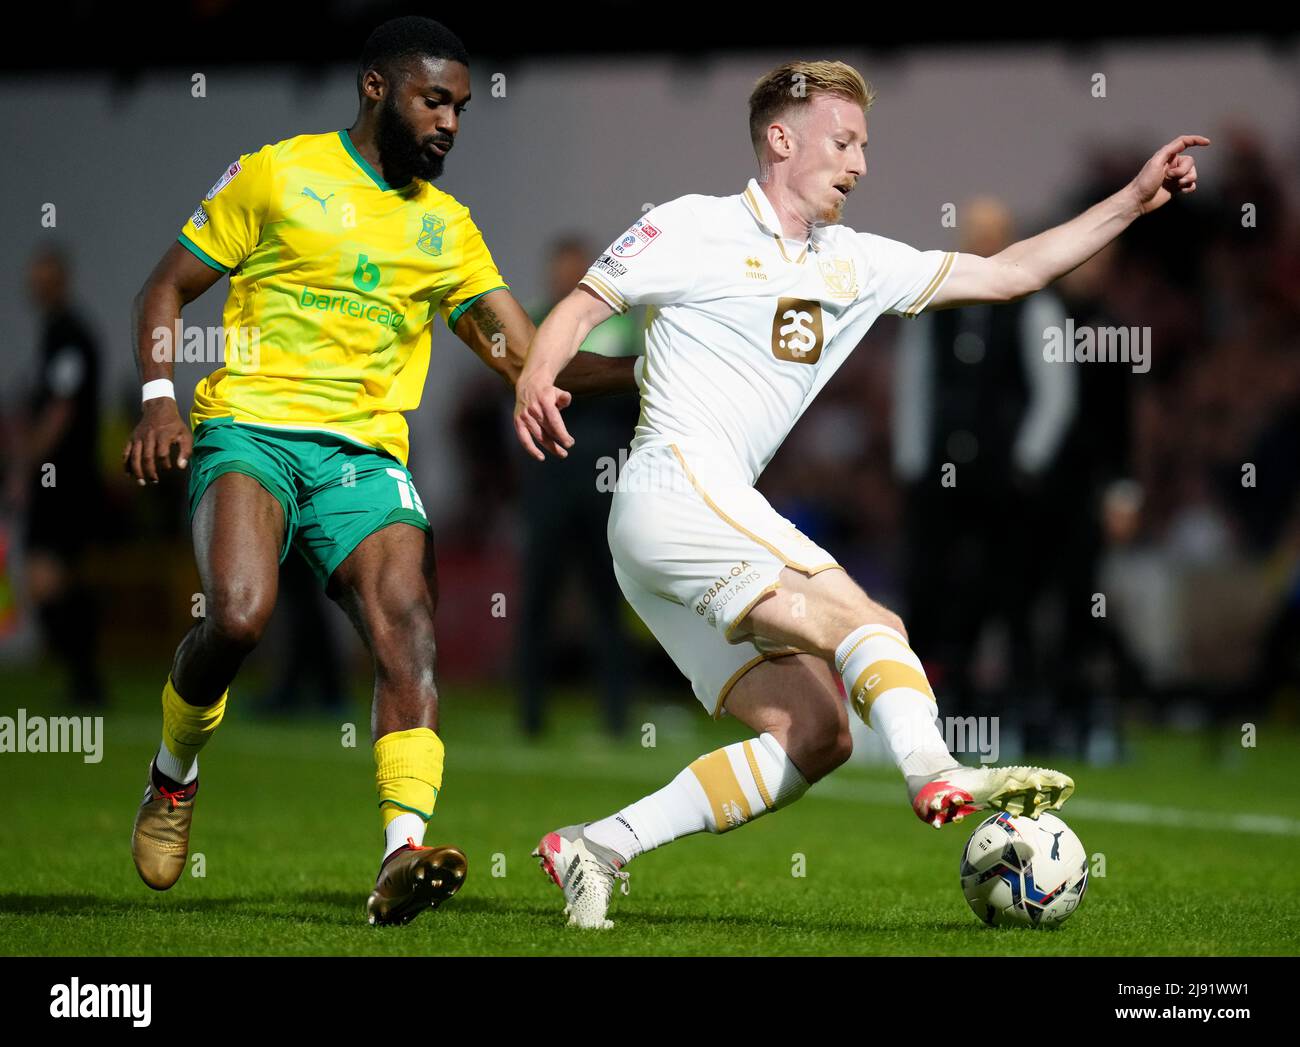 Port Vale's Harry Charsley (right) evades Swindon Town's Mandala Egbo during the Sky Bet League Two play-off semi-final, second leg match at Vale Park, Stoke-on-Trent. Picture date: Thursday May 19, 2022. Stock Photo